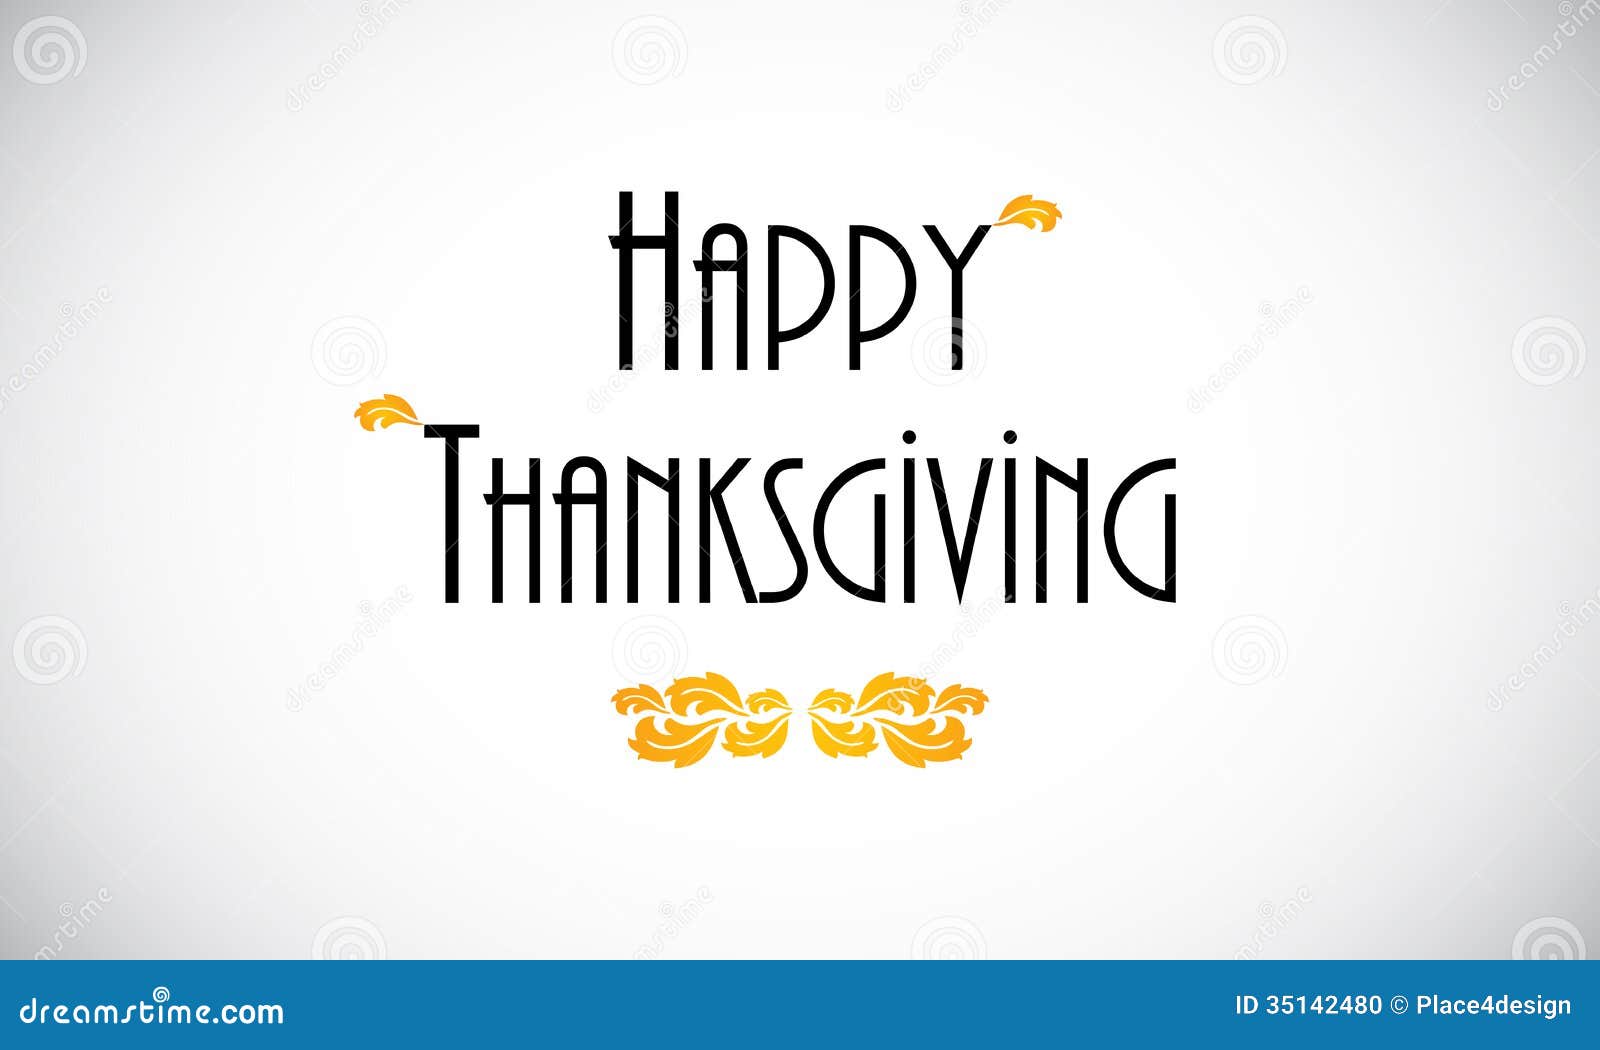 Thanksgiving Greeting Card Stock Vector Illustration Of Holiday 35142480